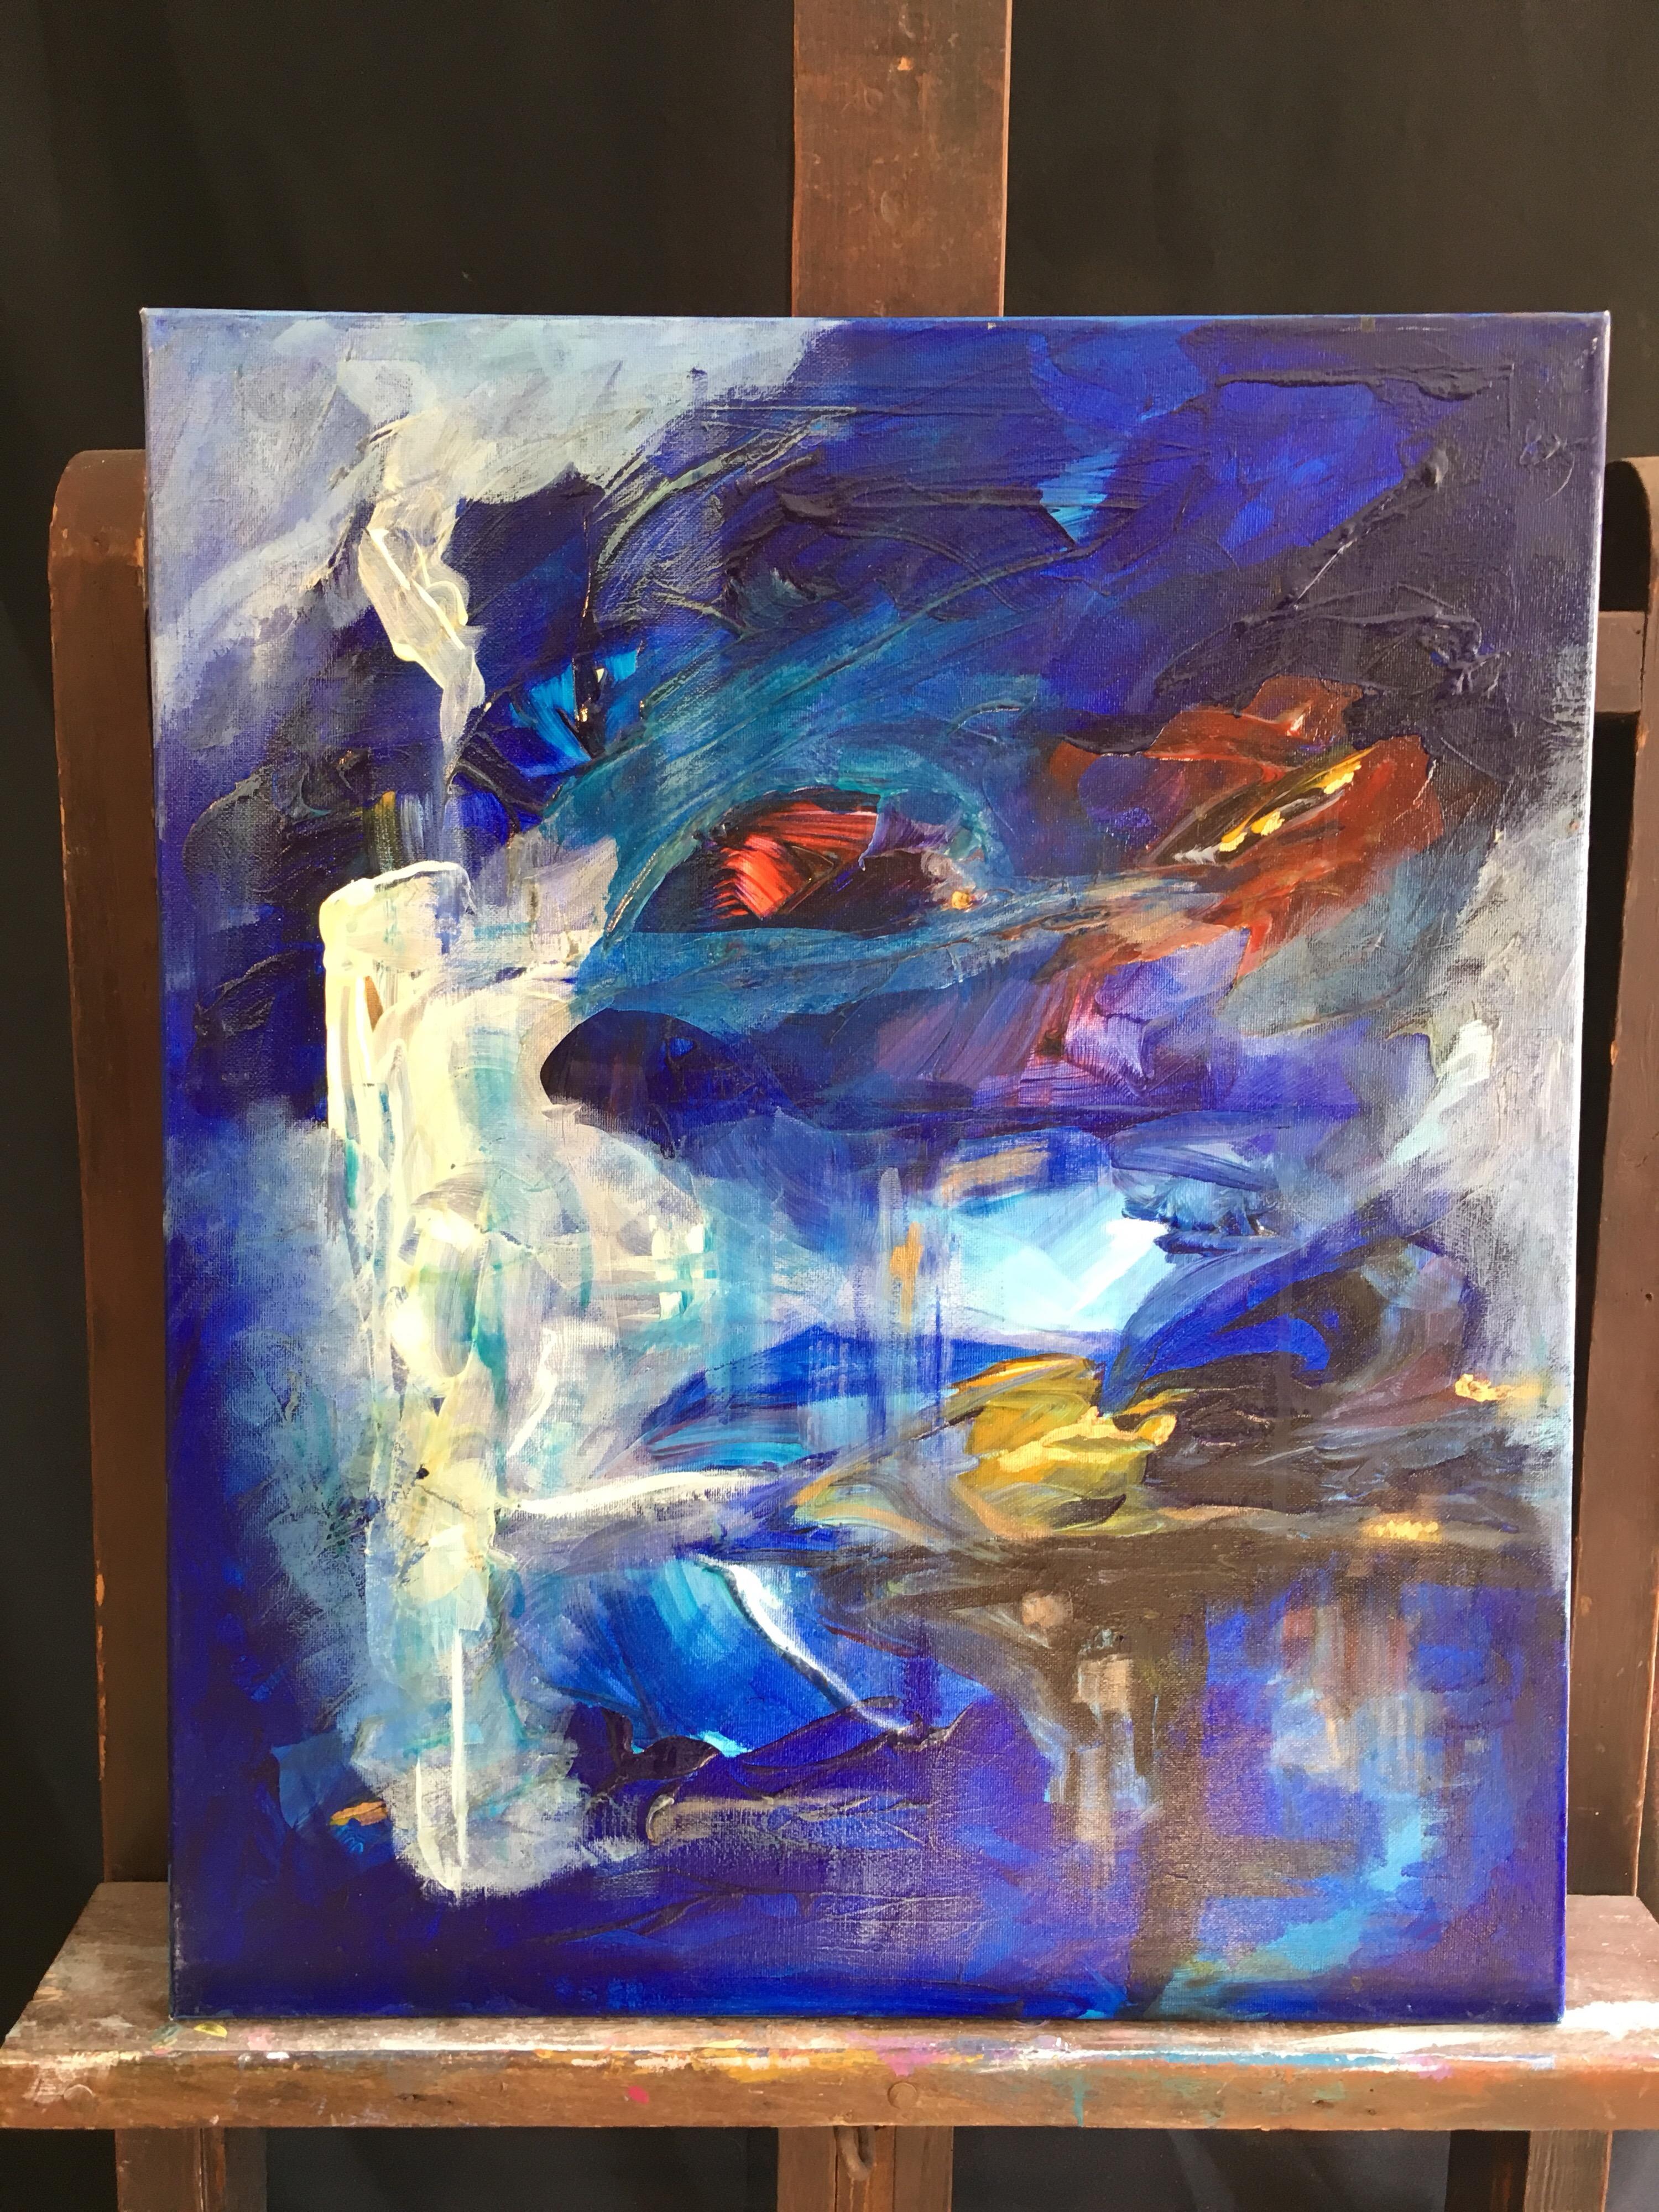 Blue World, Abstract Oil Painting, Signed
By British School artist, 21st Century
Signed indistinctly on the back top corner
Oil painting on canvas, unframed
Canvas size: 23 x 19.5 inches

Undeniably stylish abstract oil painting, using a rich